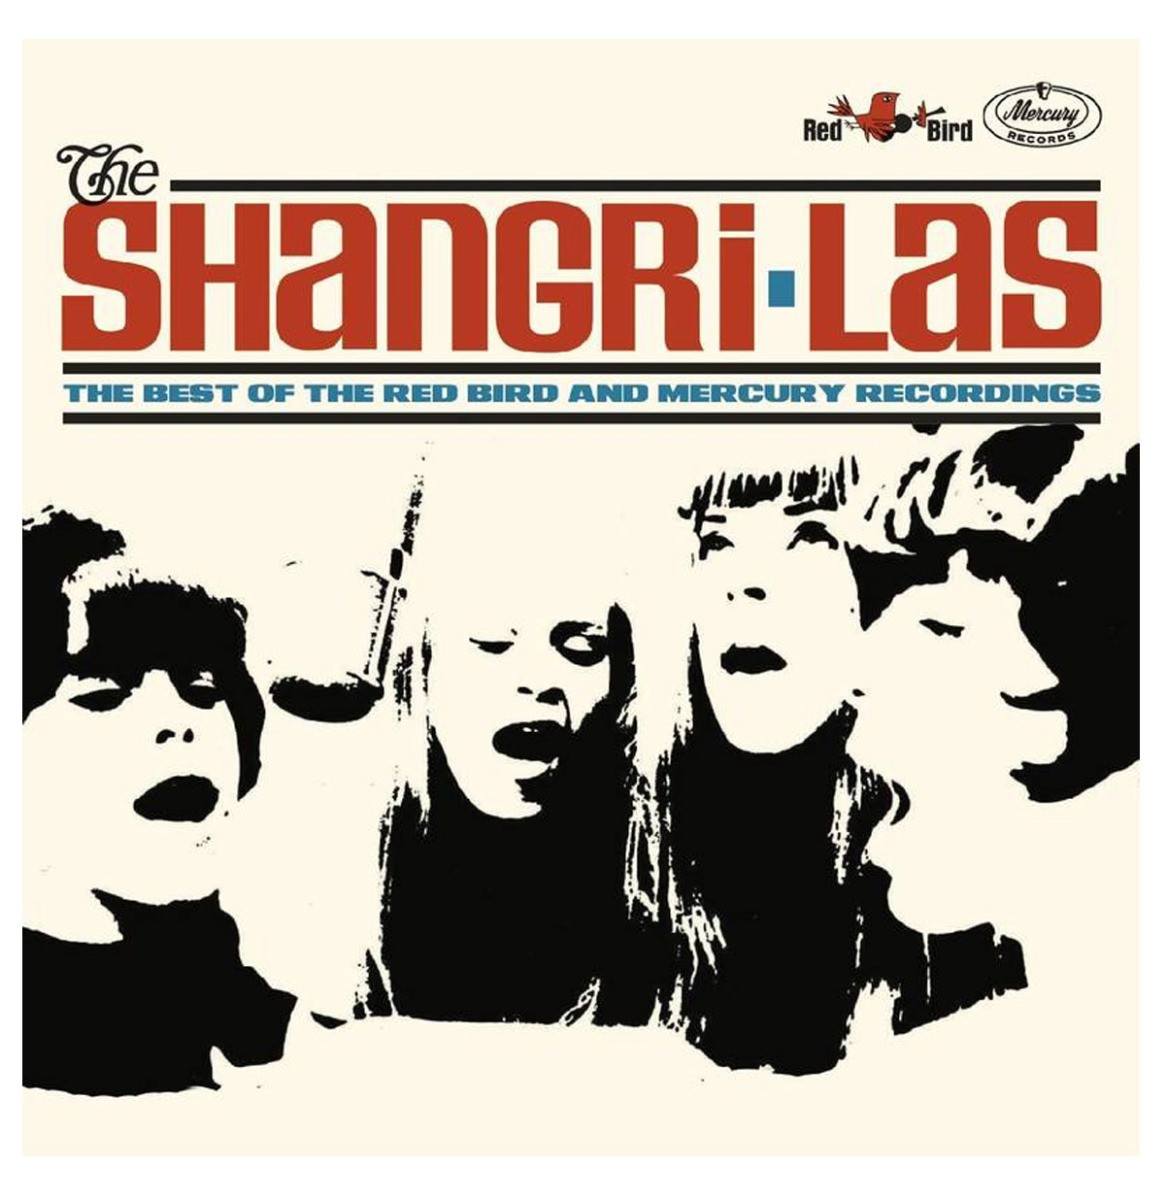 Shangri-Las - The Best of the Red Bird and Mercury Recordings LP (Record Store Day Black Friday)